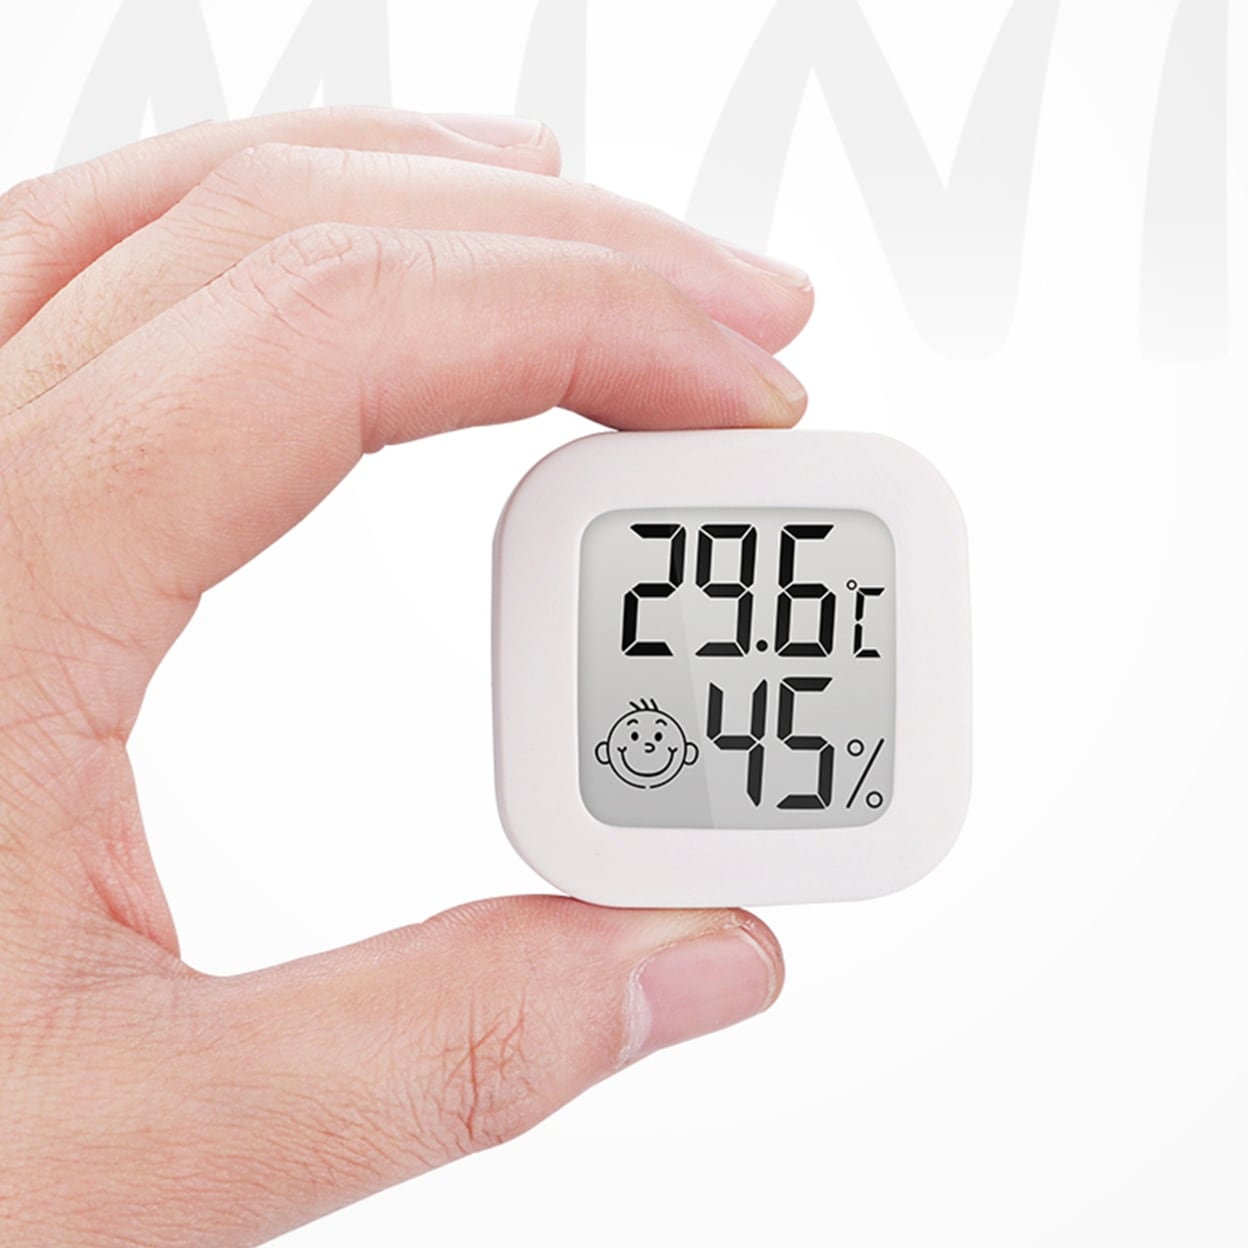 https://ak1.ostkcdn.com/images/products/is/images/direct/5c2d5df7de14921c056cbbfa3ec0cce564f0a137/Professional-Temperature-Humidity-Meter-Real-Time-Monitoring-Accurate-Measurement-Test-Tools-Hygrometer-Thermometer-For.jpg